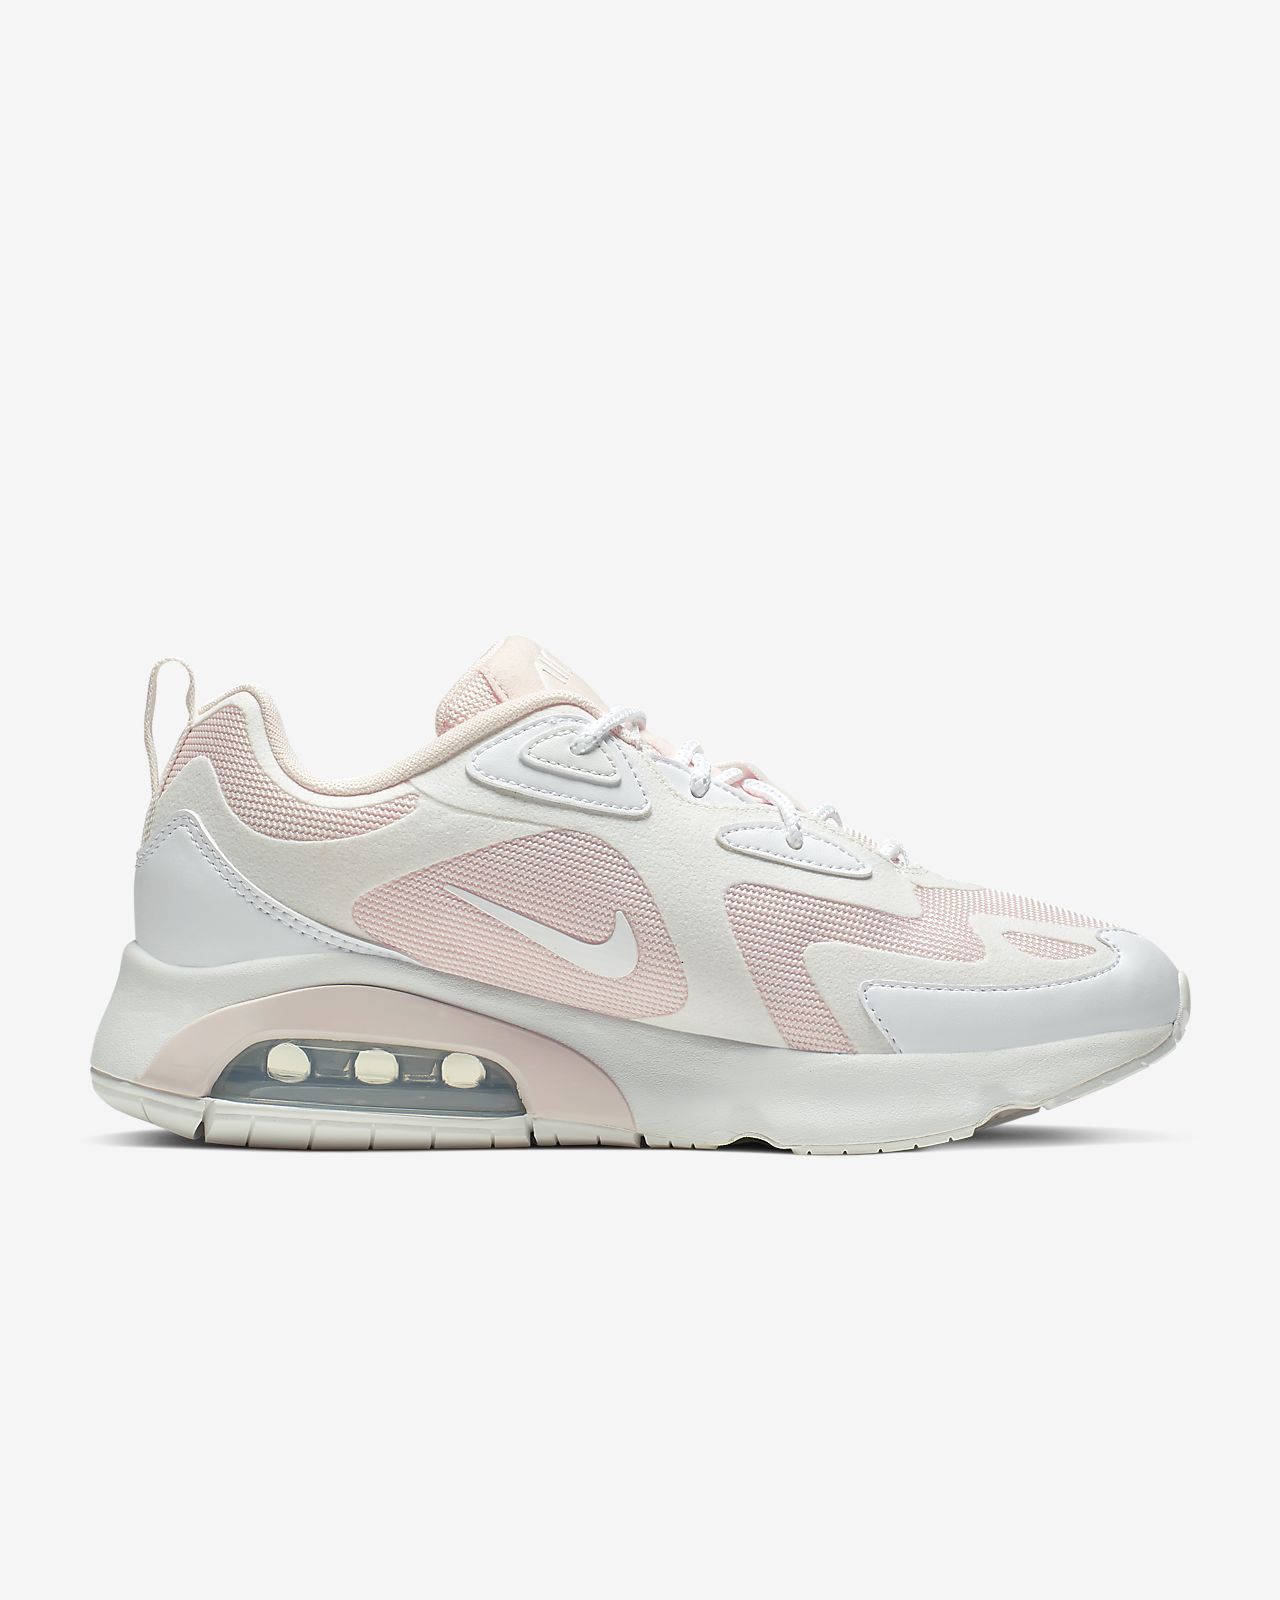 nike air max 200 women's pink and white